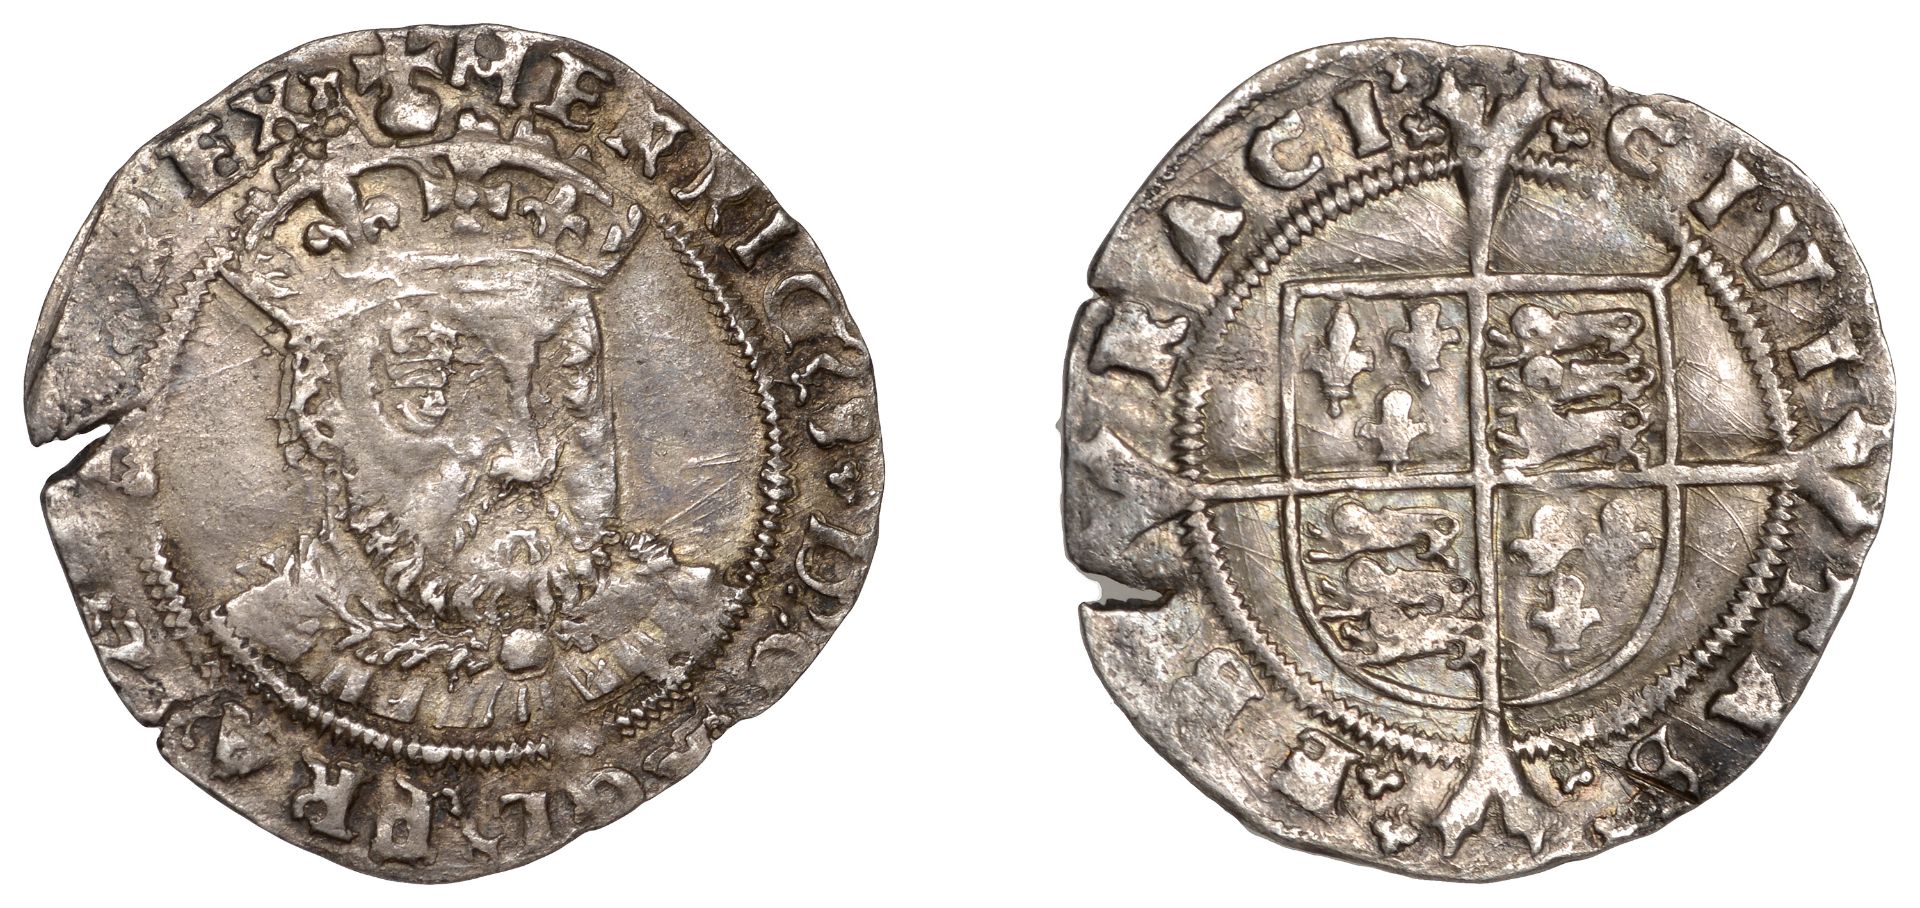 Henry VIII (1509-1547), Third coinage, Groat, York, no mm., bust 2, Roman lettering, open fo...